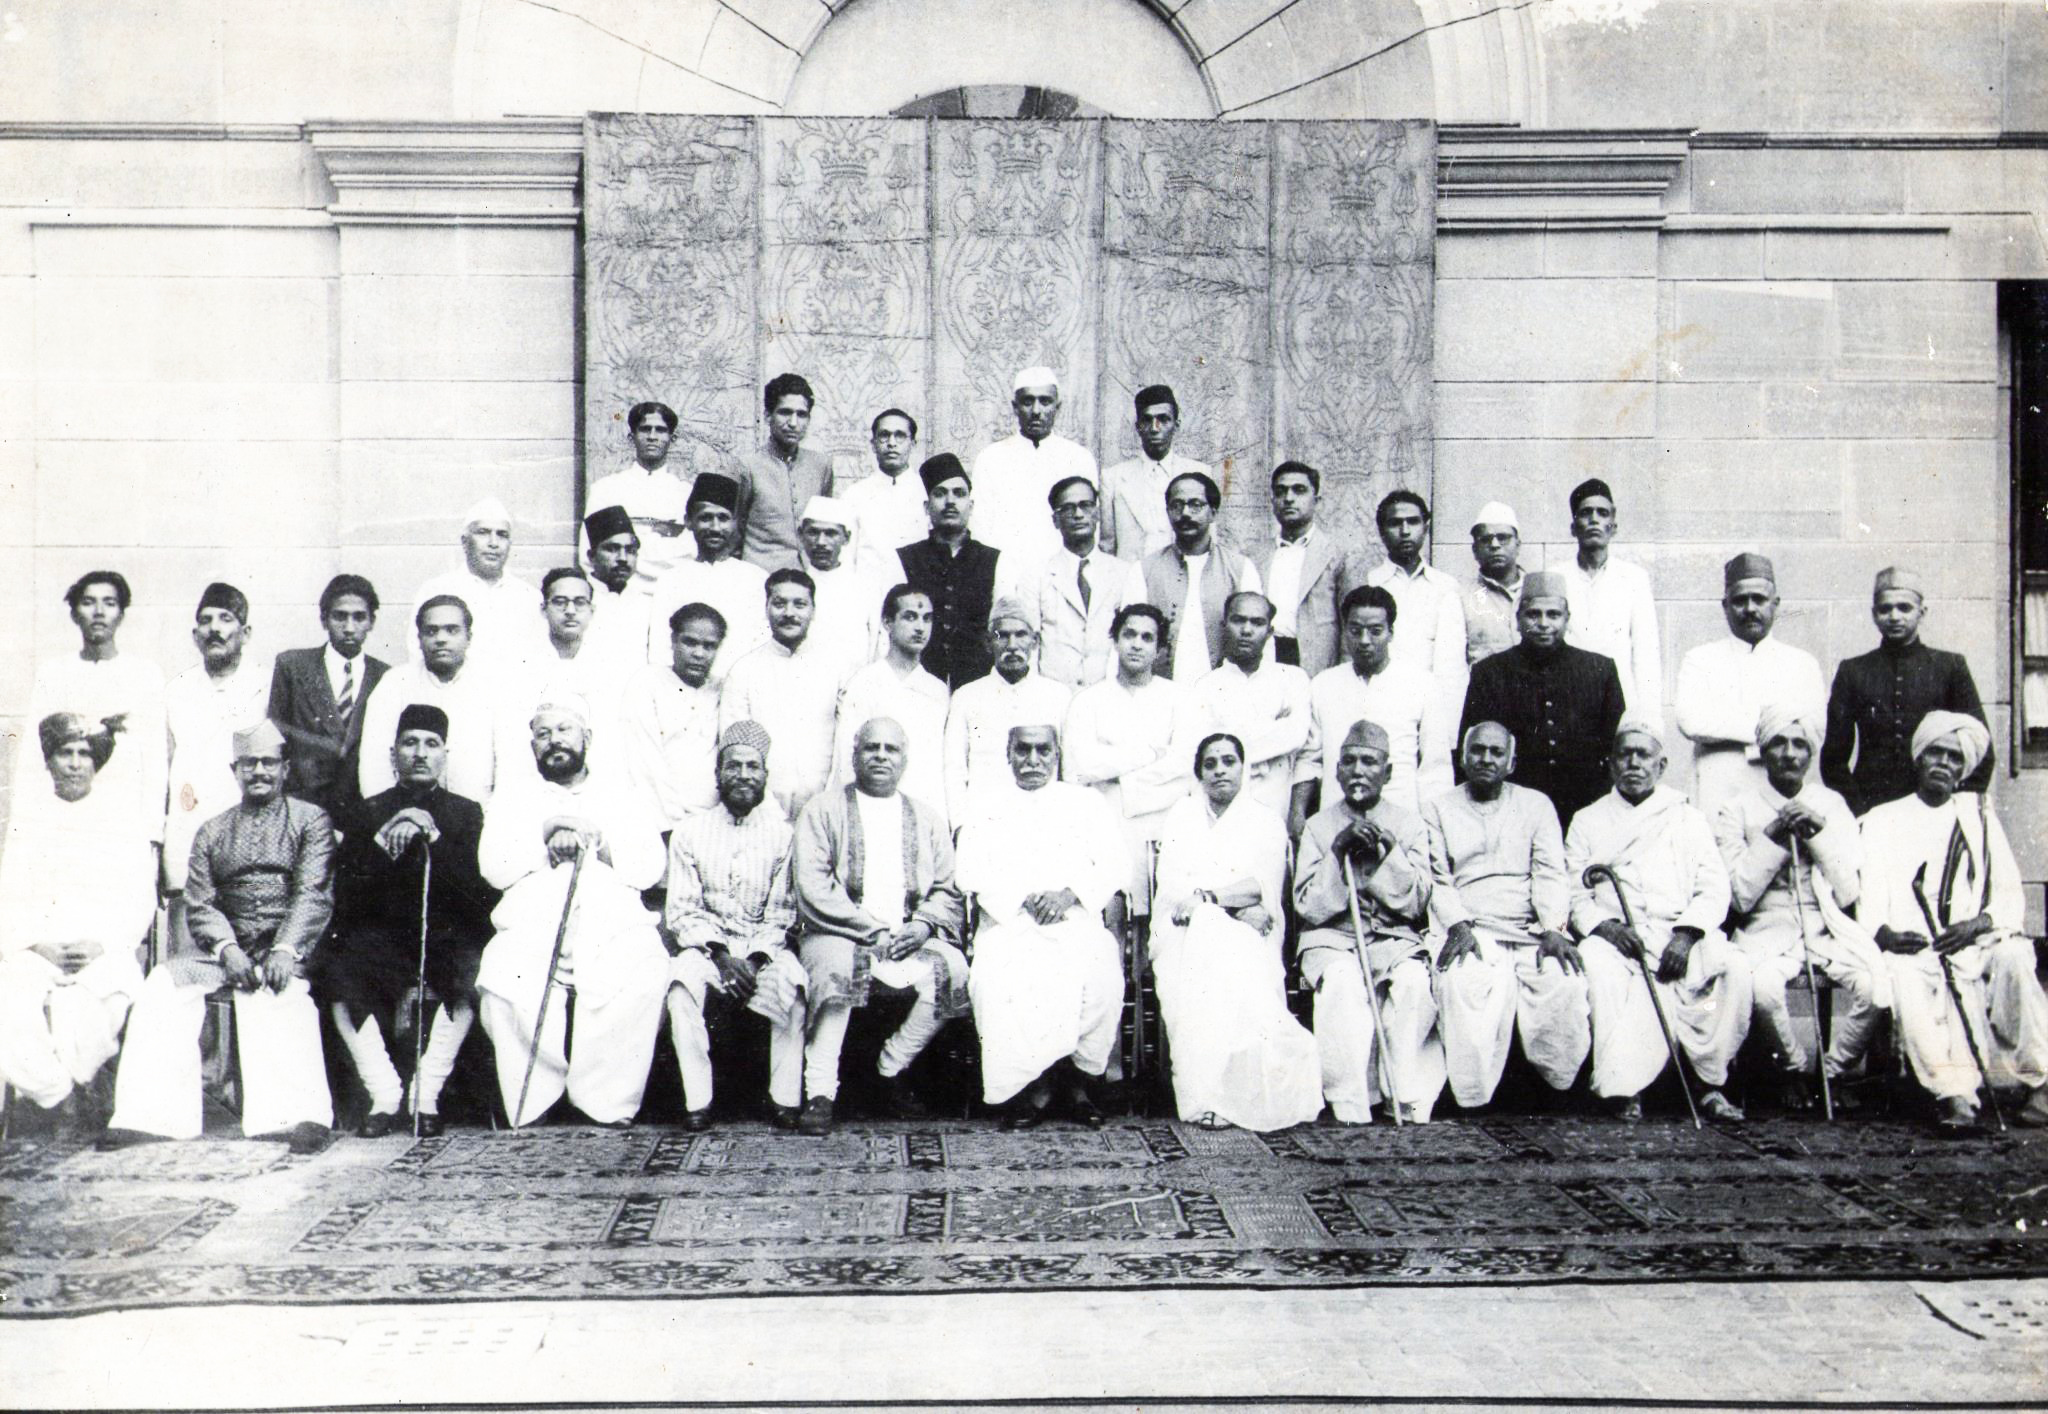  Find here Rajendra Prasad, Kesarbai Kerkar, Allaudin Khan and a few others...&nbsp;© Courtesy Roy Chowdhury, private collection / Uncredited 